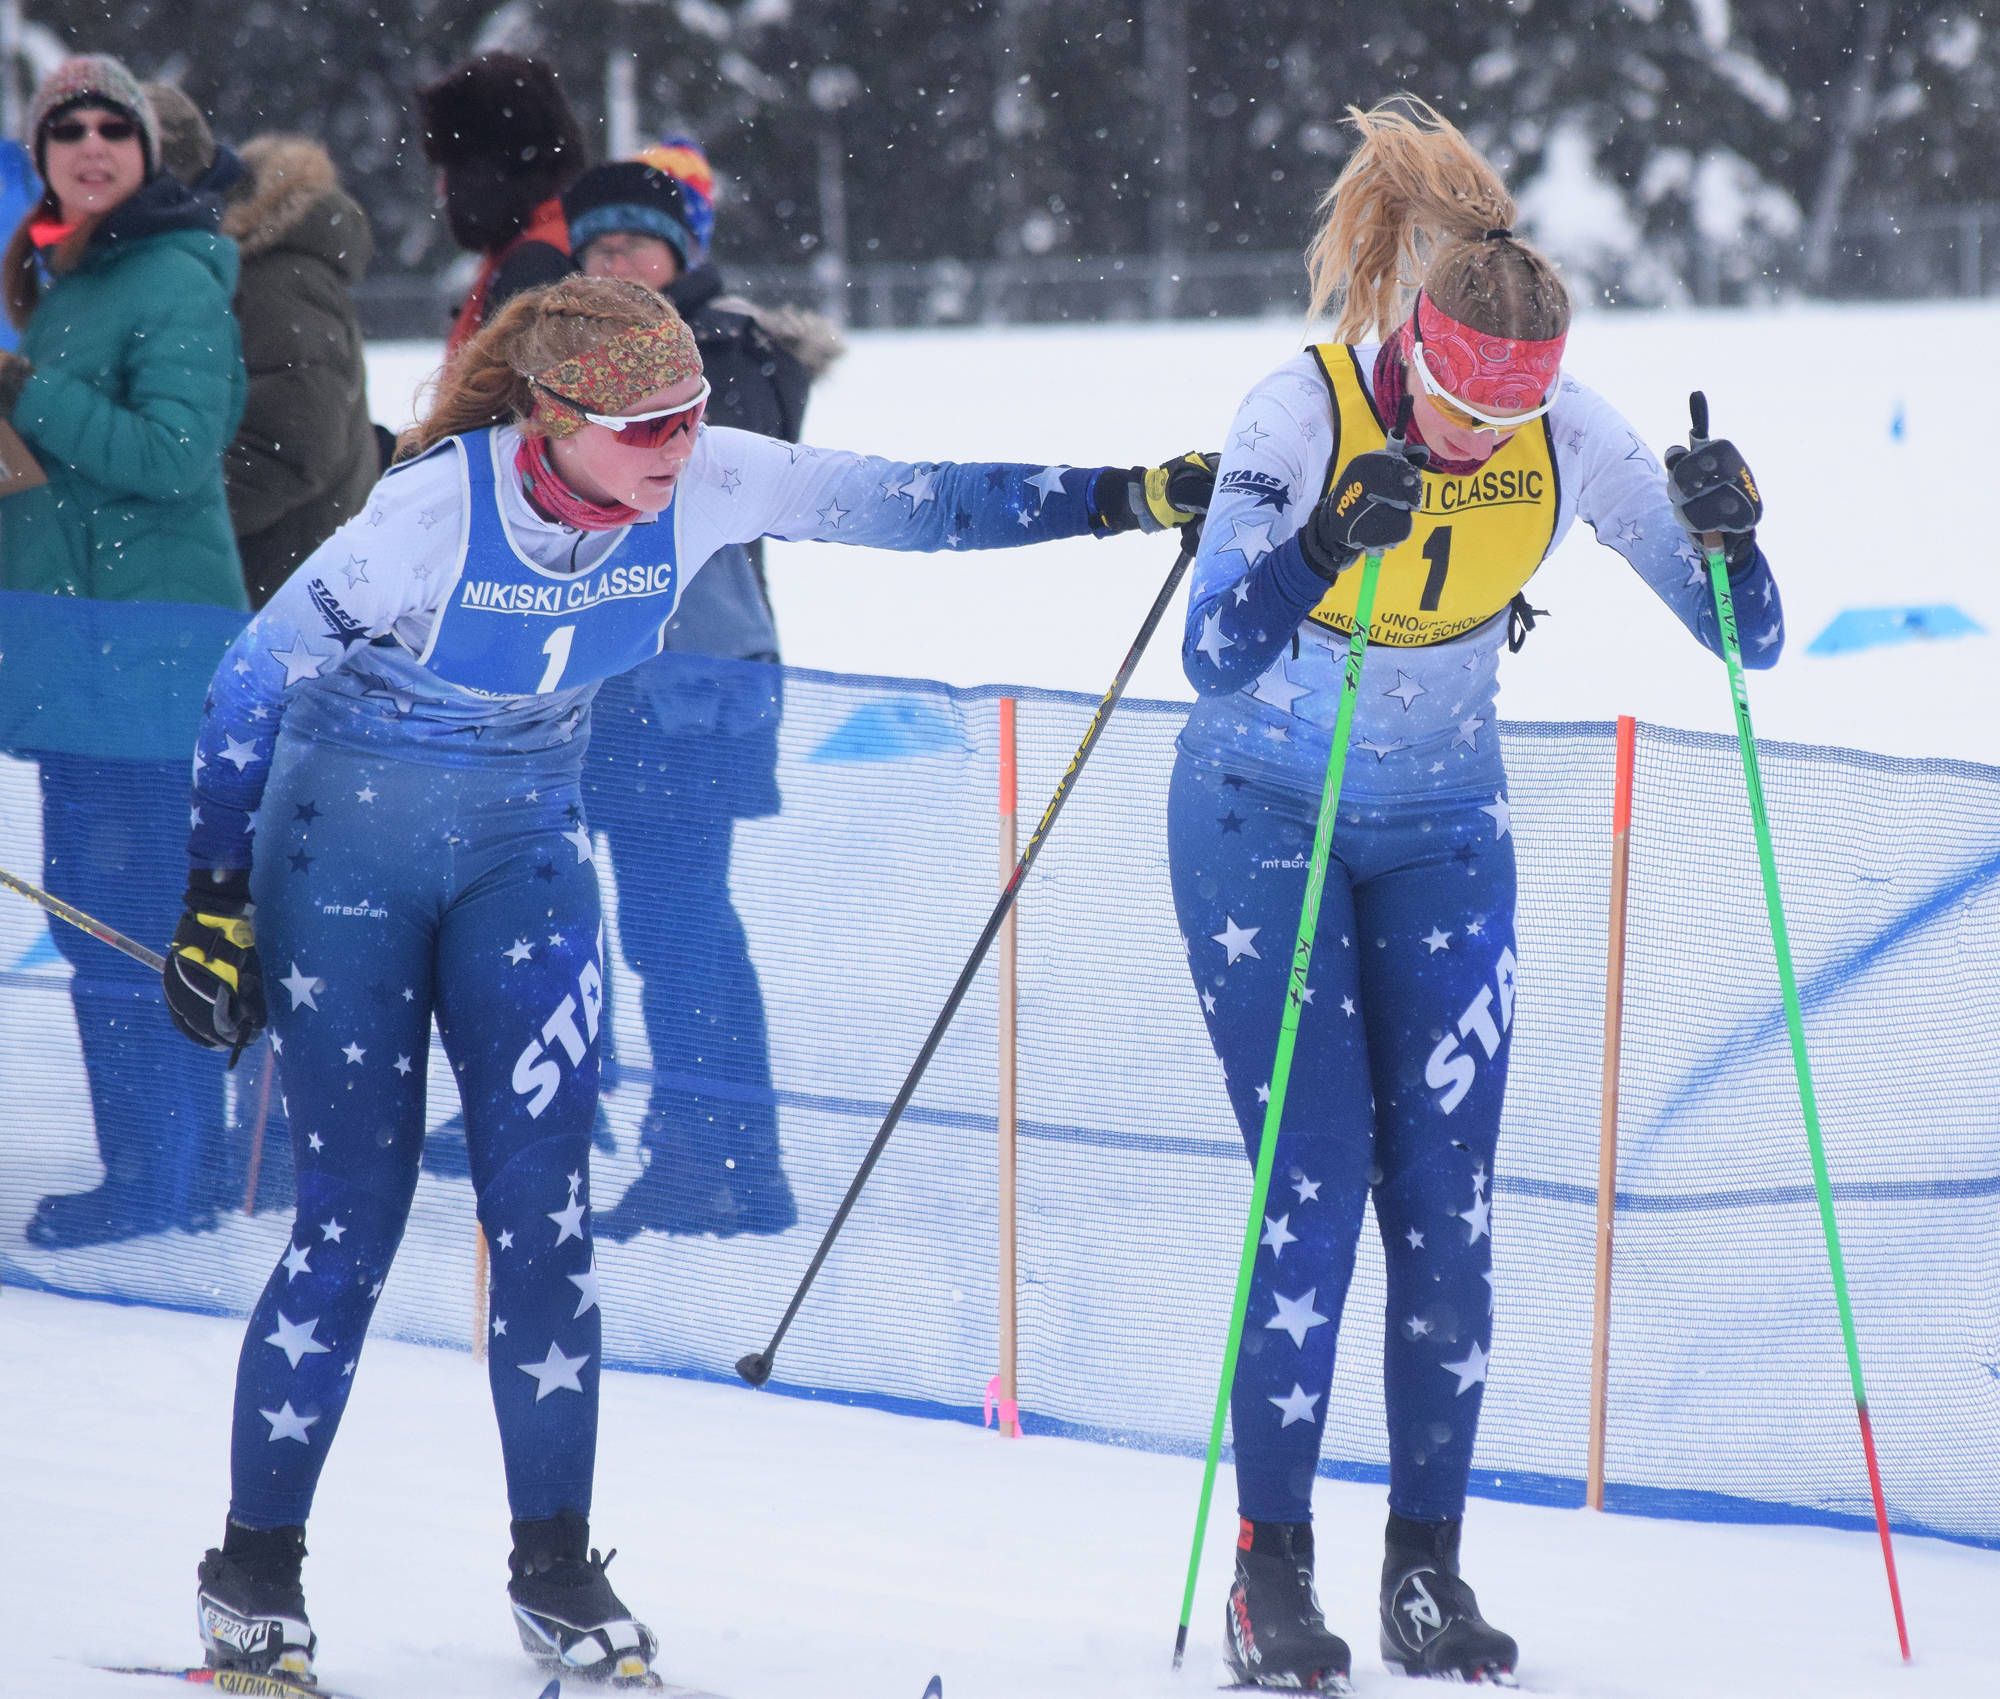 Soldotna’s Sonora Martin (left) tags off to teammate Cameron Blackwell in a relay race Saturday afternoon at the Kenai Peninsula Borough nordic ski meet at the Tsalteshi Trails in Soldotna. (Photo by Joey Klecka/Peninsula Clarion)